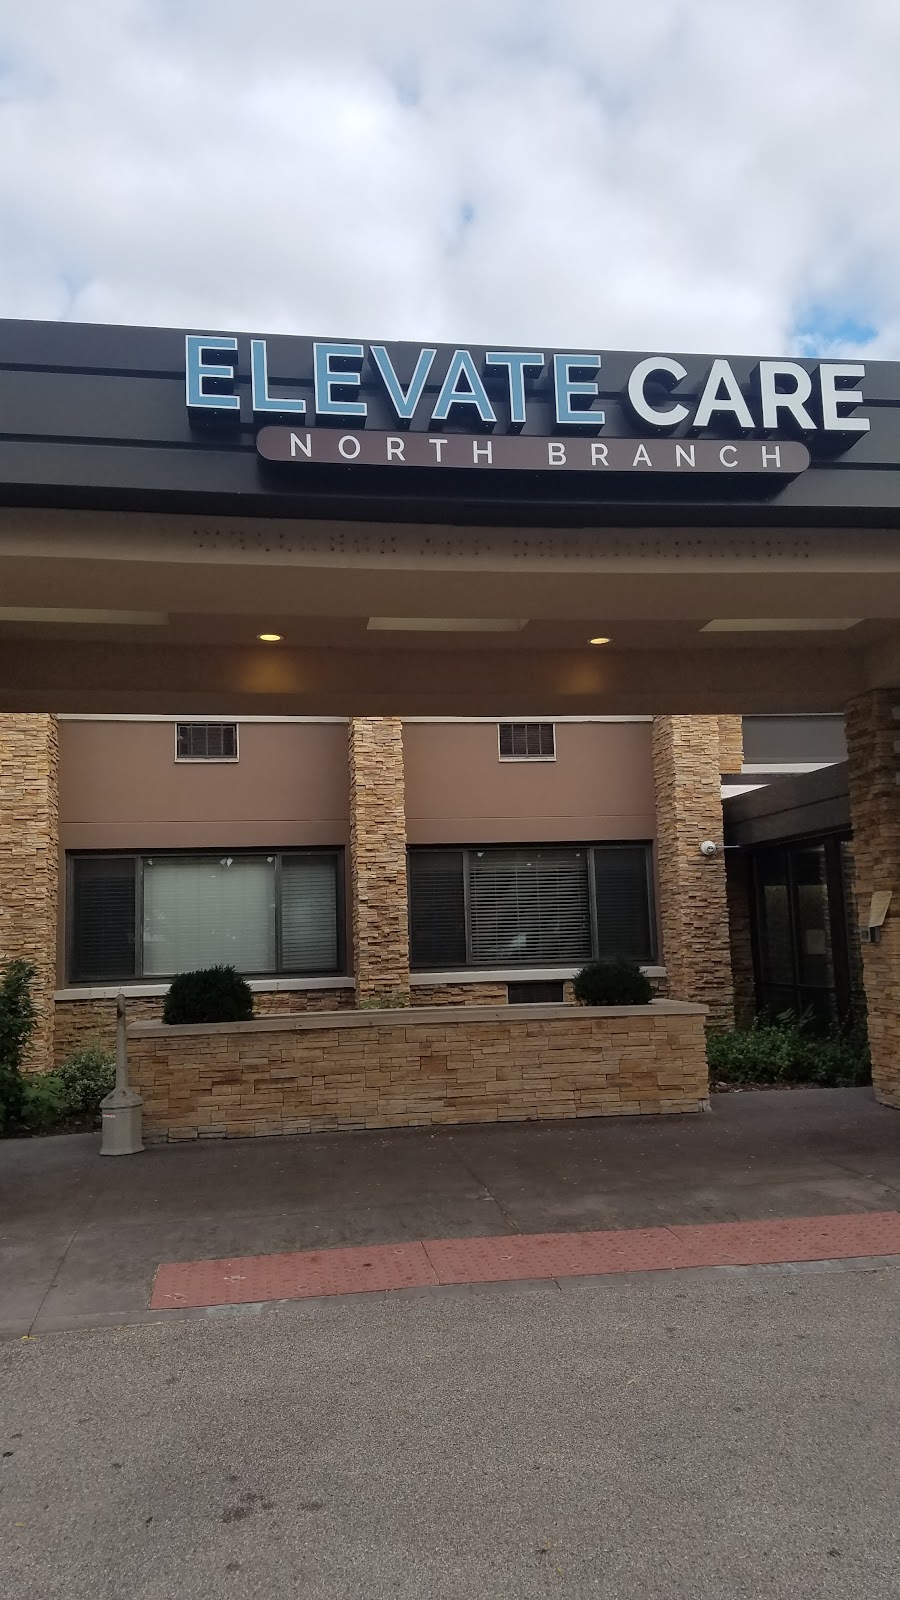 Elevate Care North Branch | 6840 W Touhy Ave, Niles, IL 60714 | Phone: (847) 647-6400